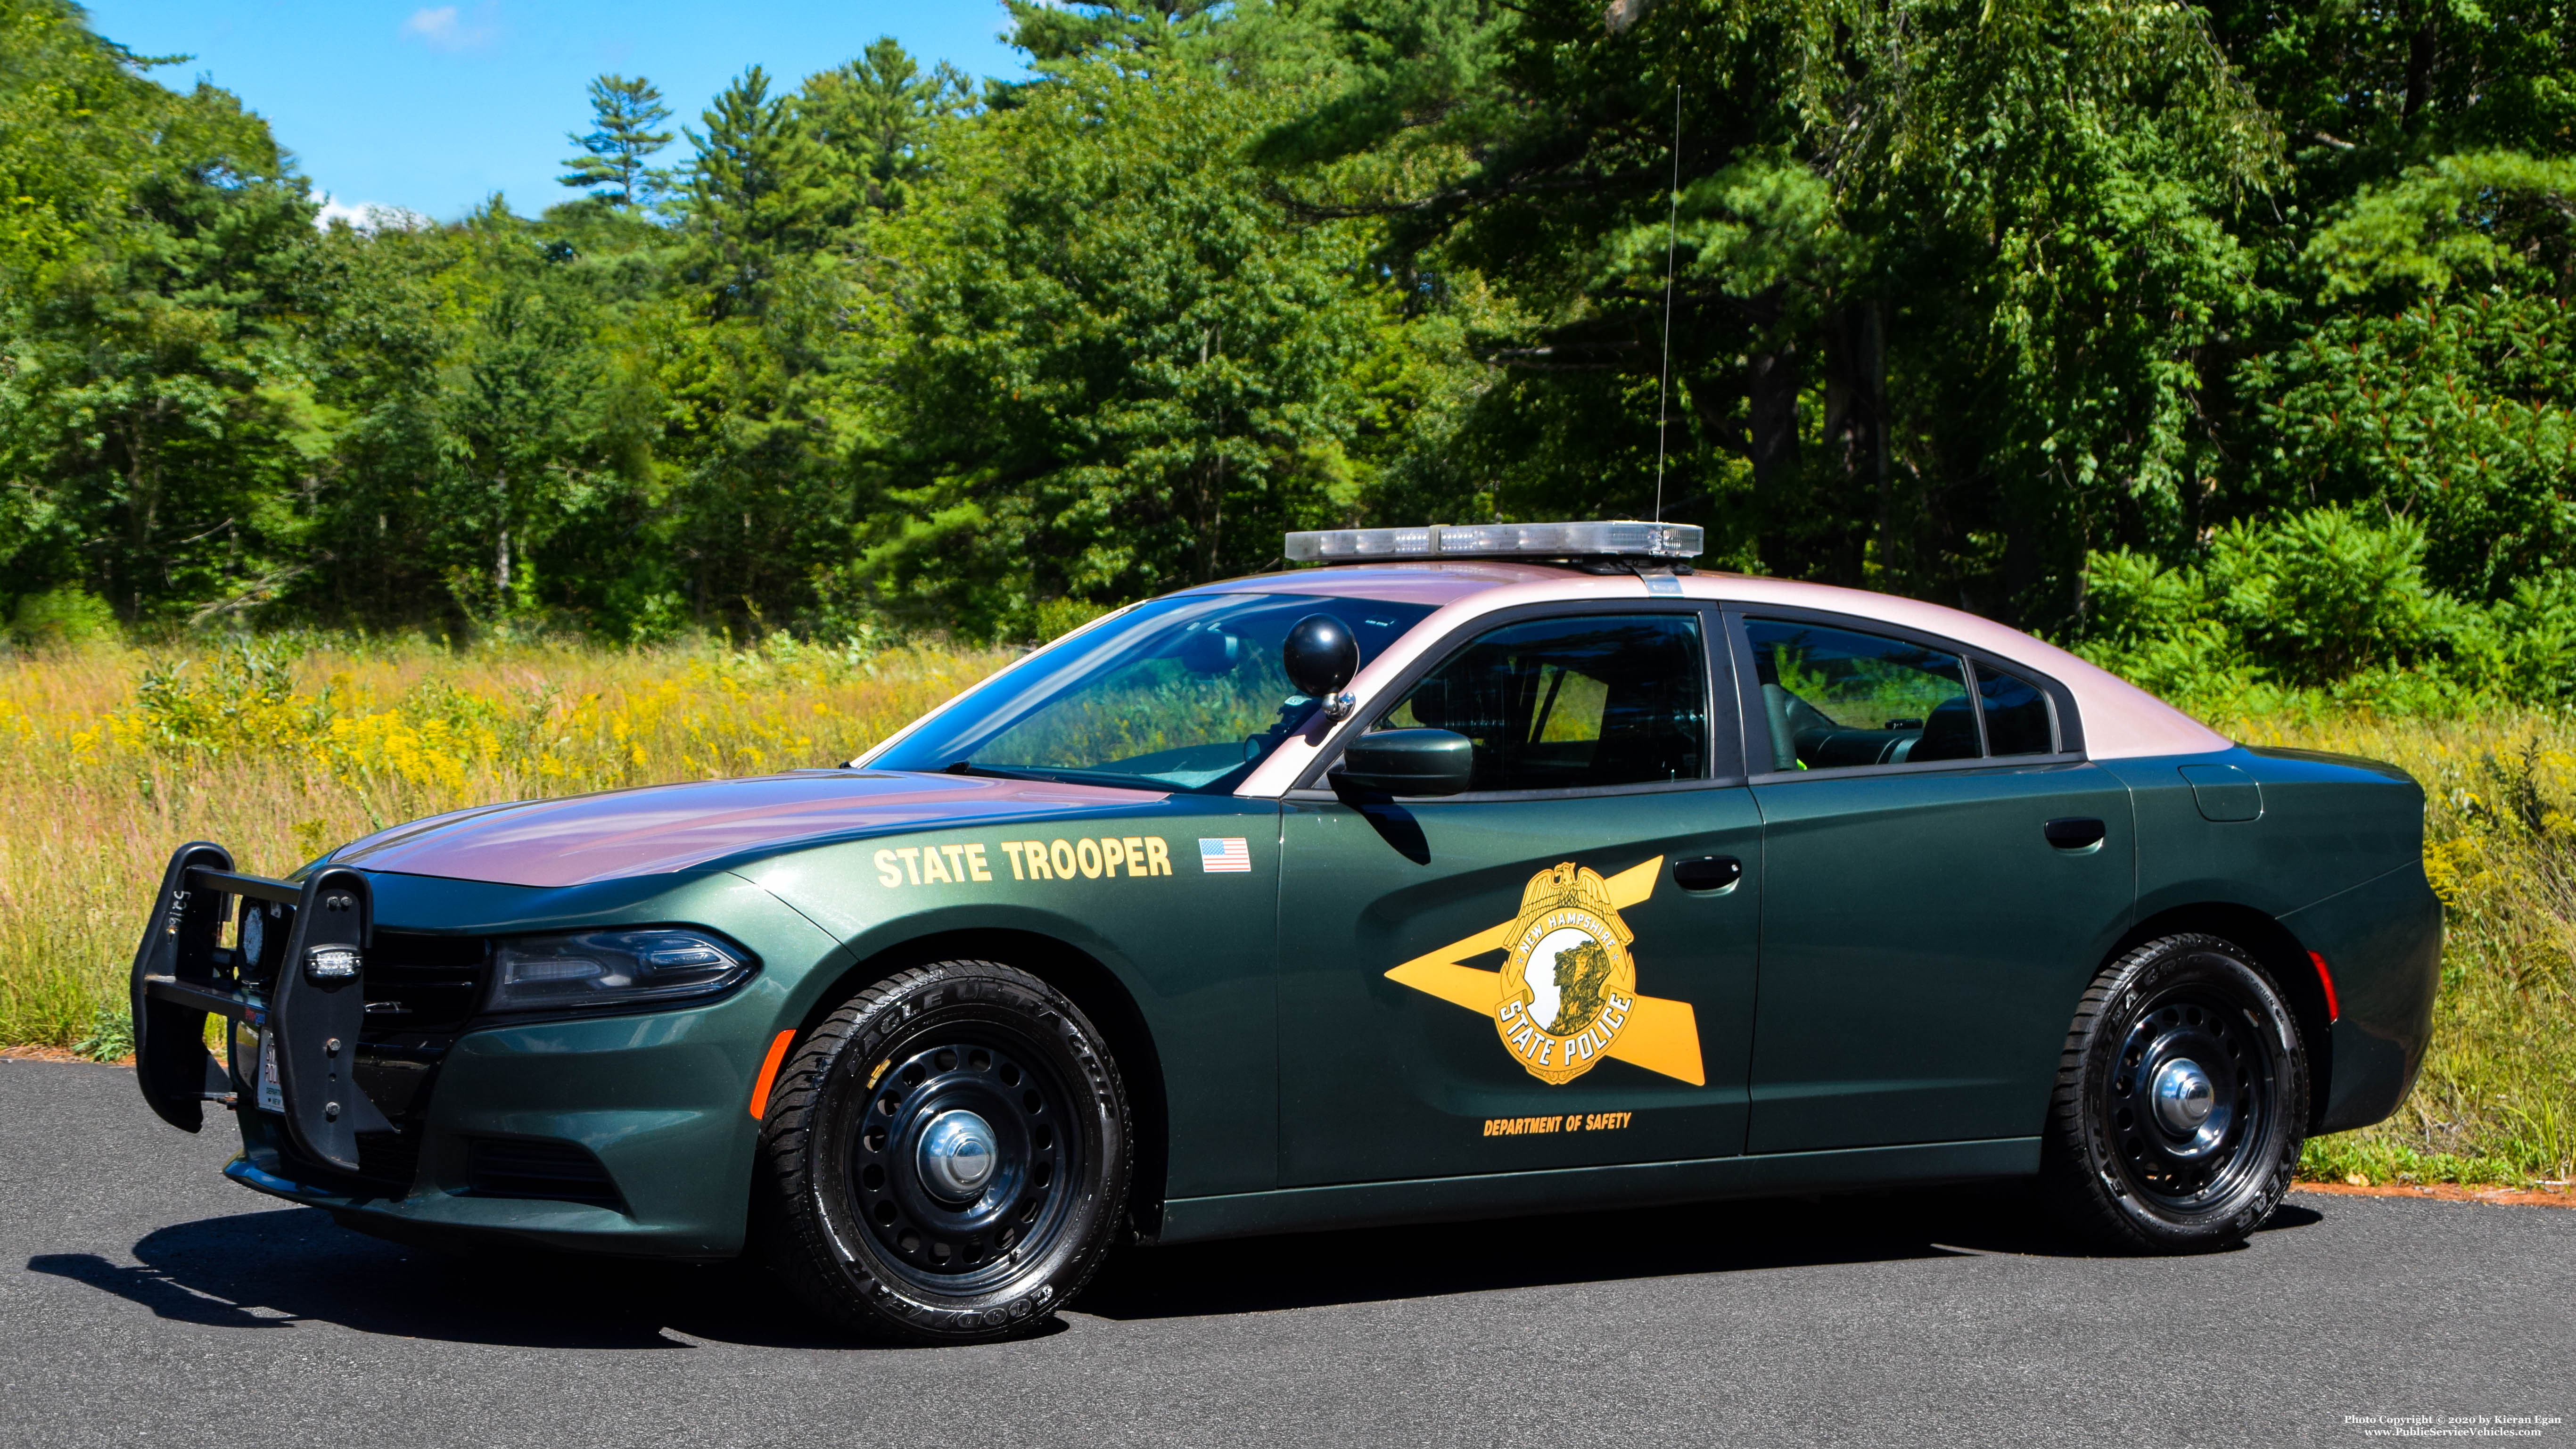 A photo  of New Hampshire State Police
            Cruiser 621, a 2016 Dodge Charger             taken by Kieran Egan